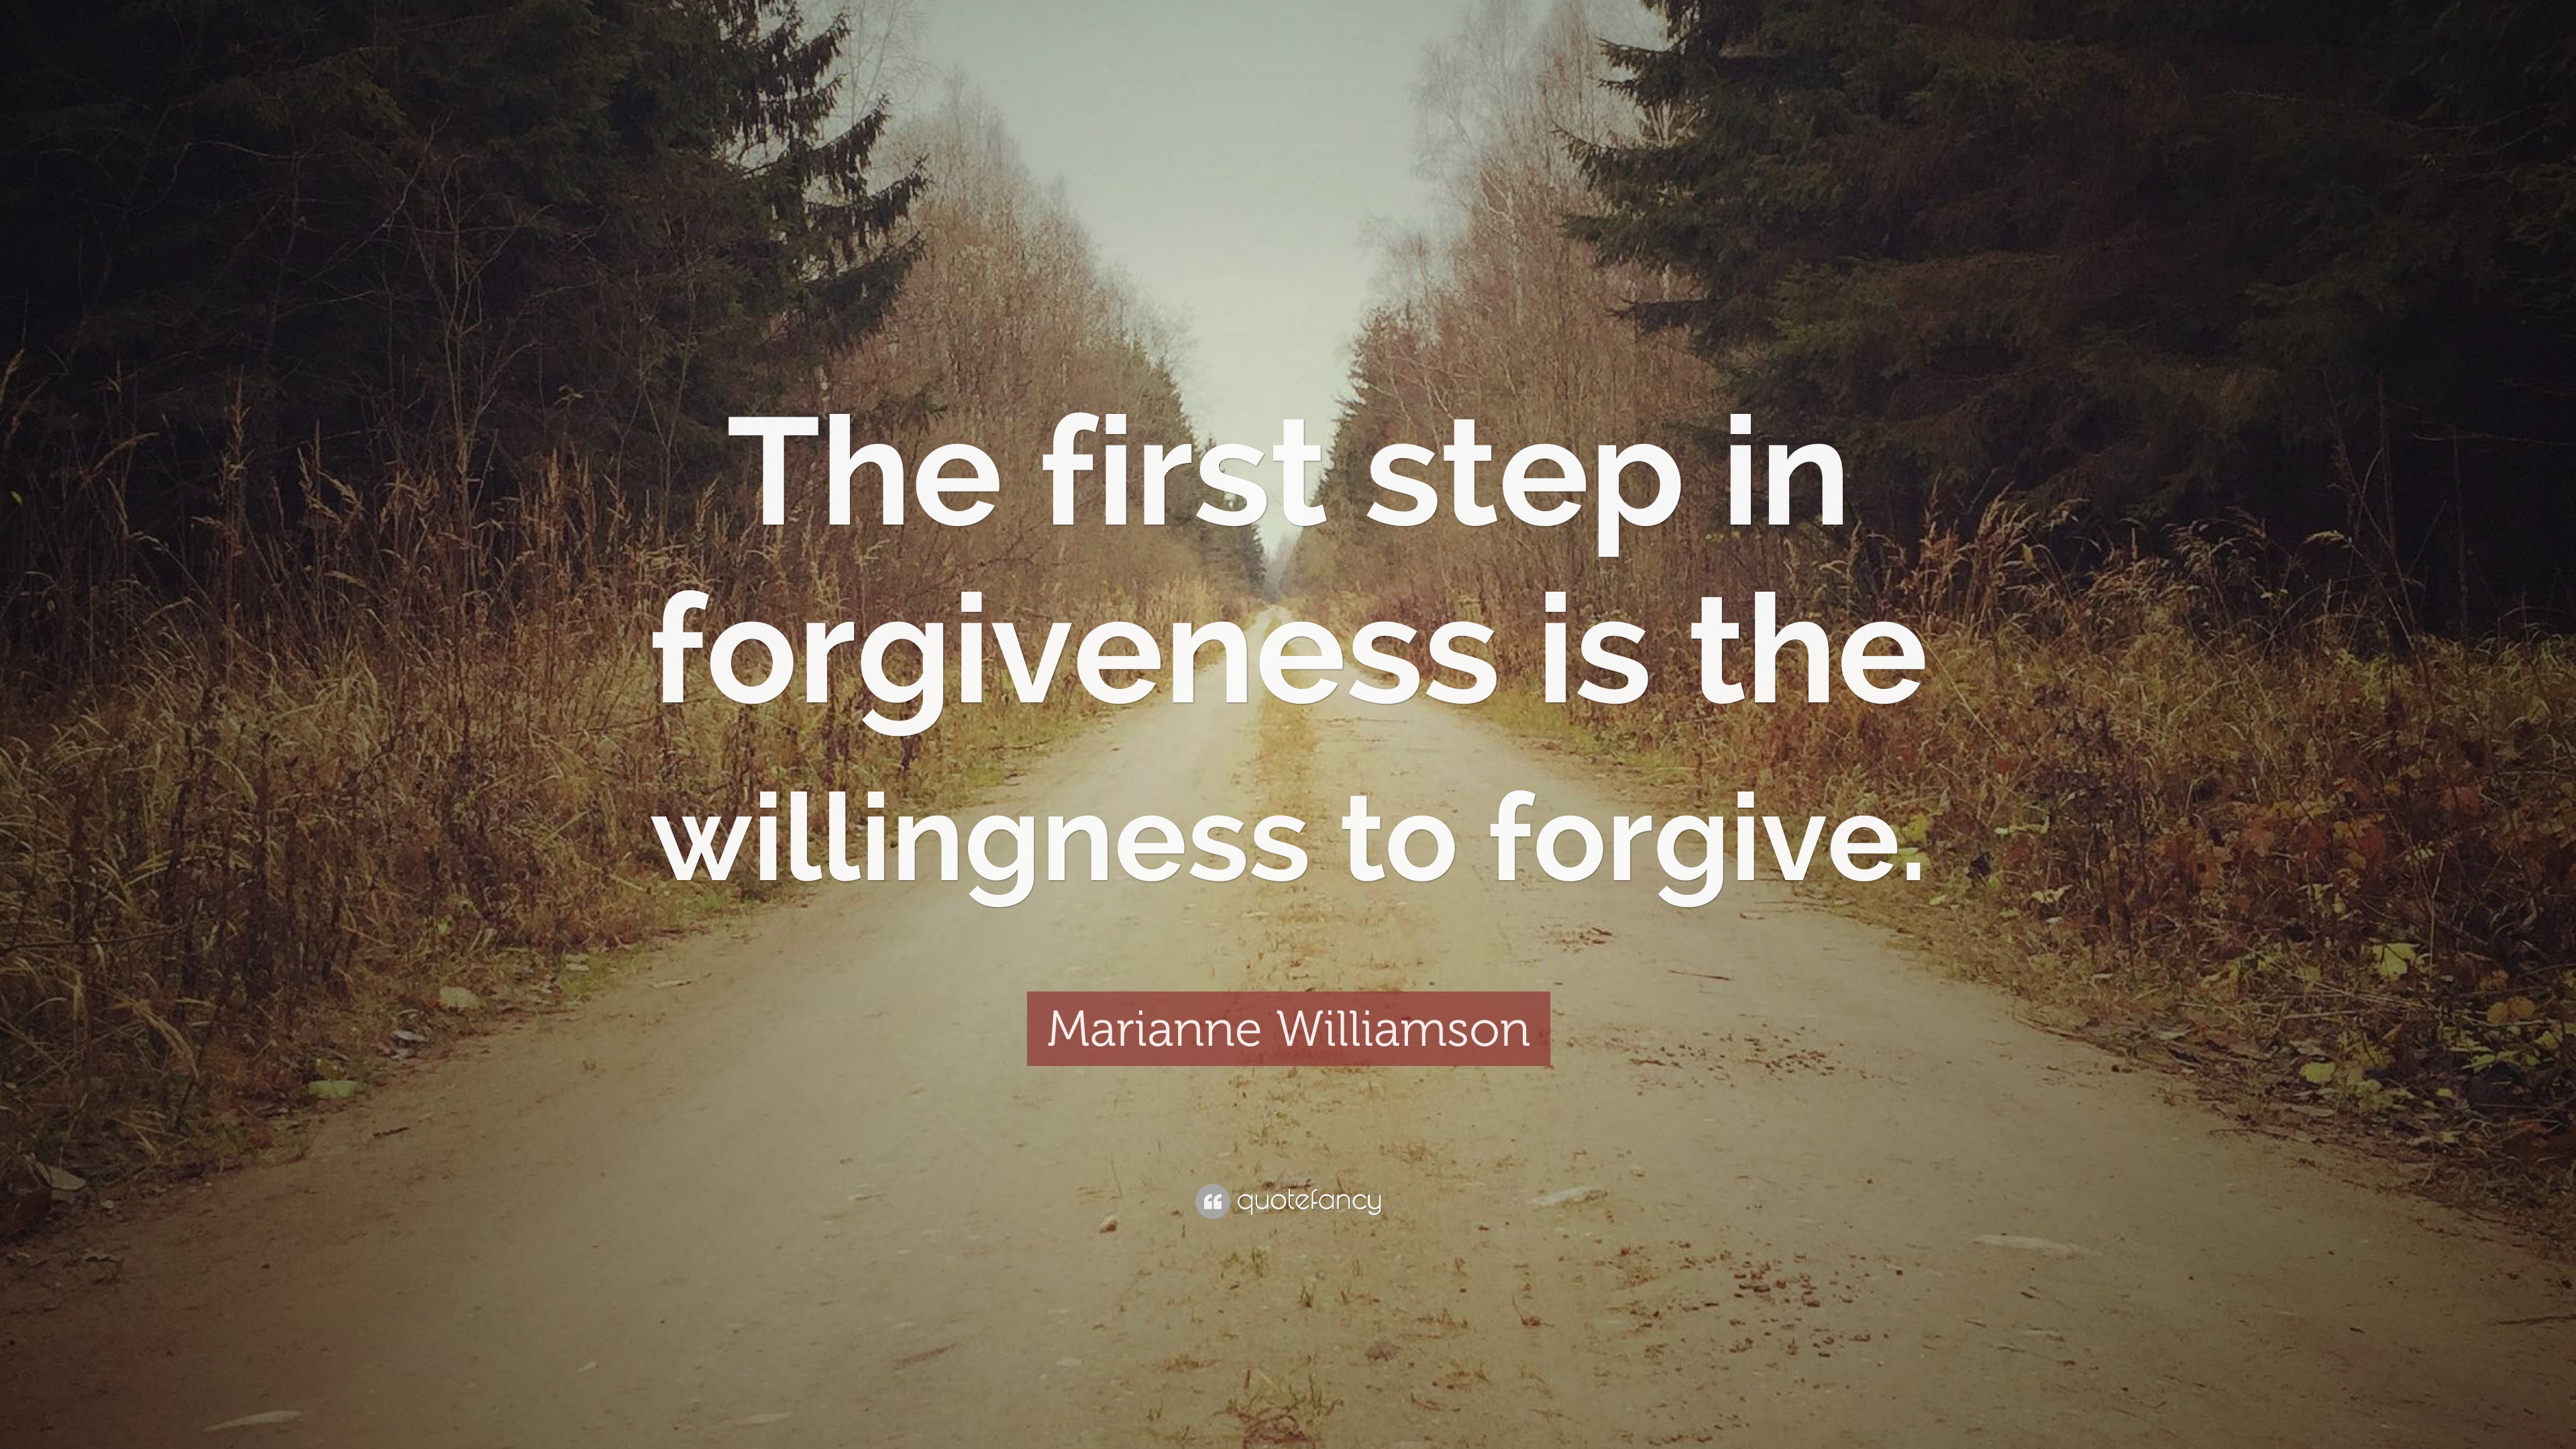 Marianne Williamson Quote: “The first step in forgiveness is the ...